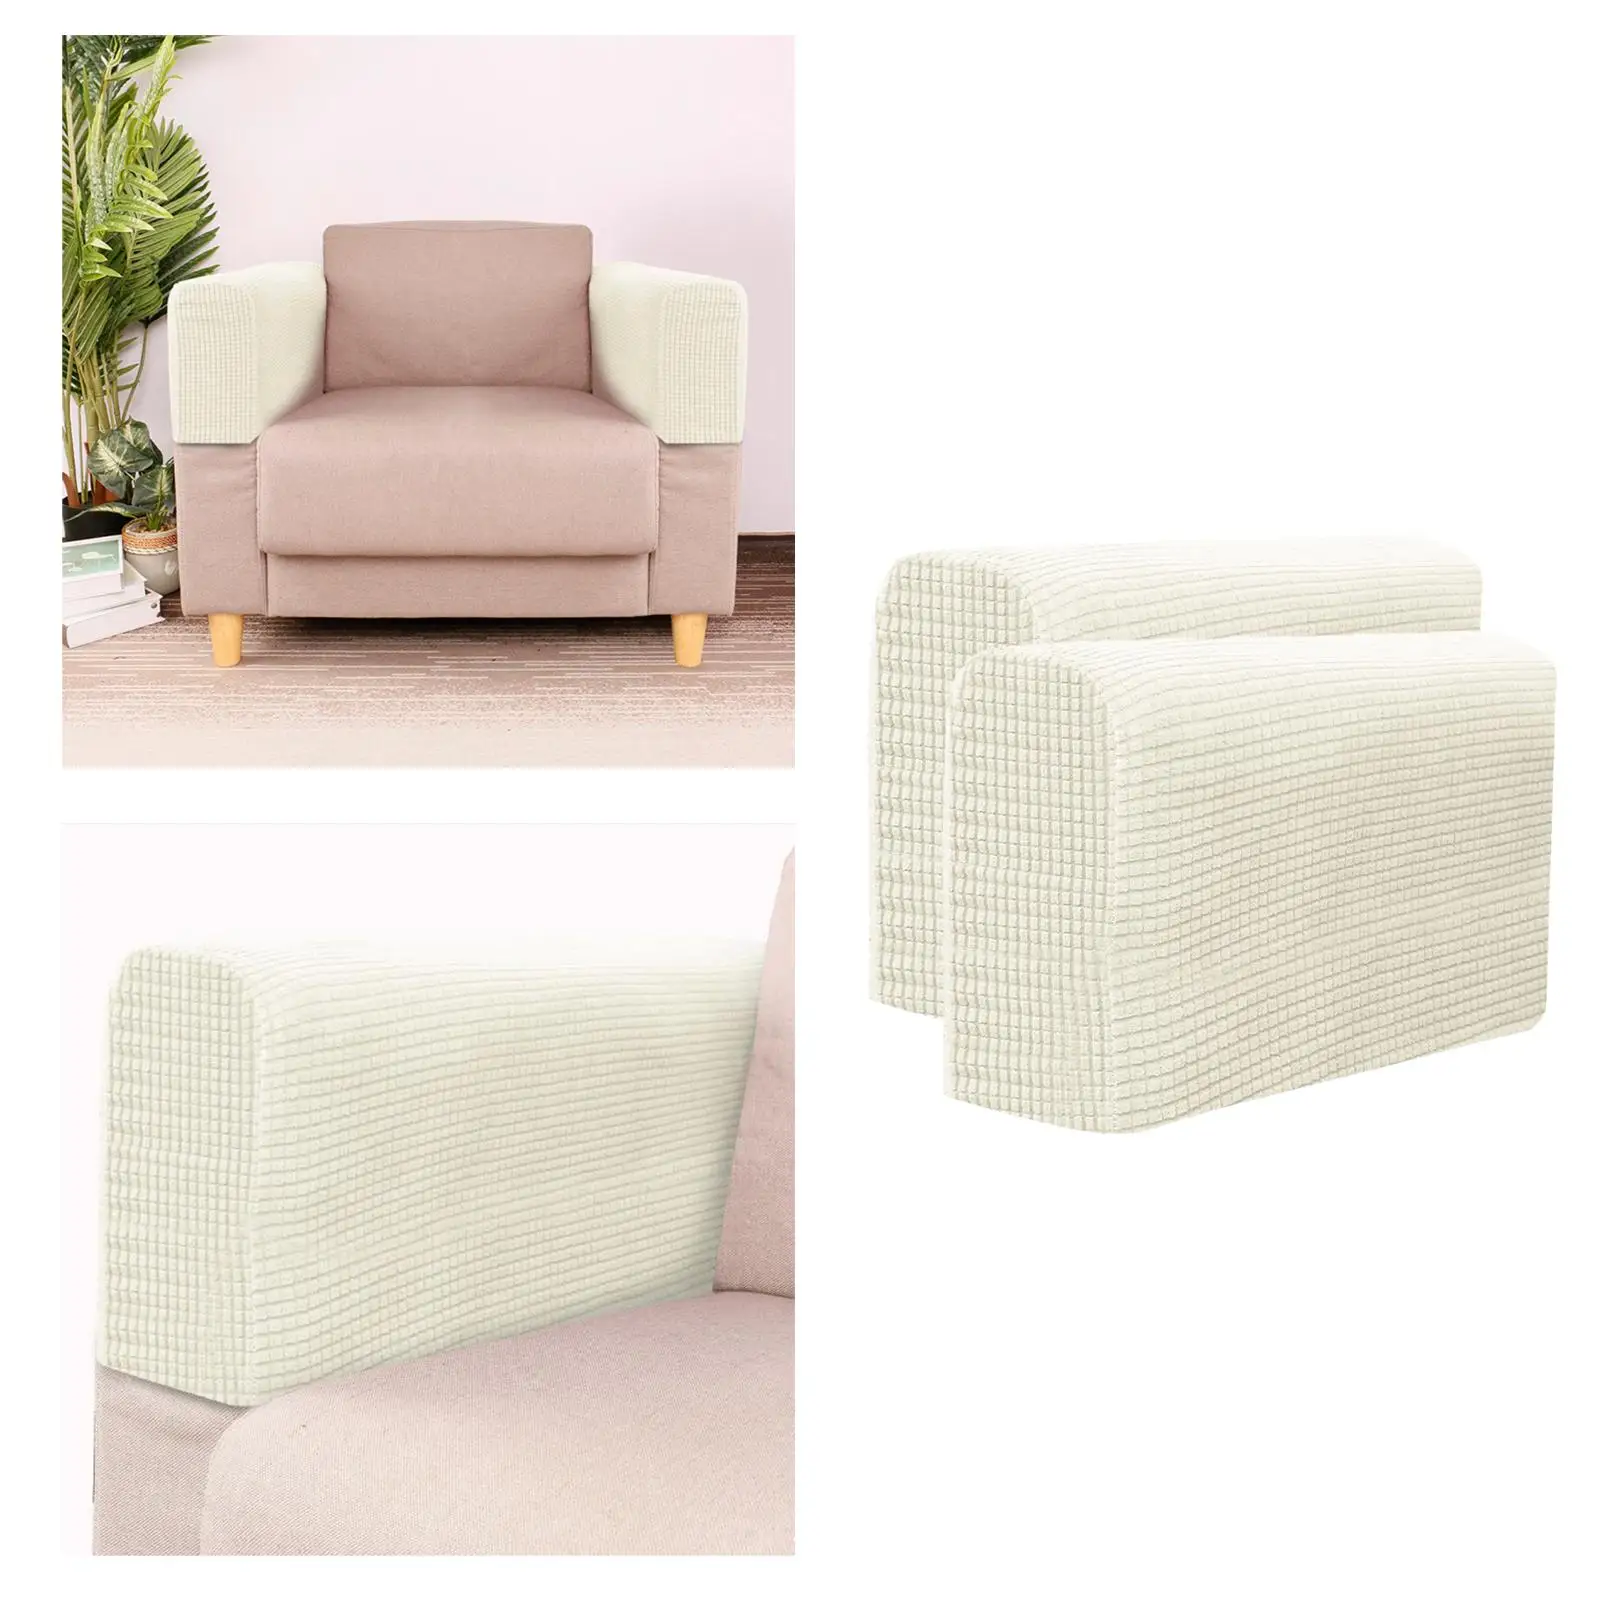 1 Pair Sofa Armrest Cover Soft Polyester Jacquard Stretchable Slipcover Arm Covers for Recliner Loveseat Couch Arm Protector